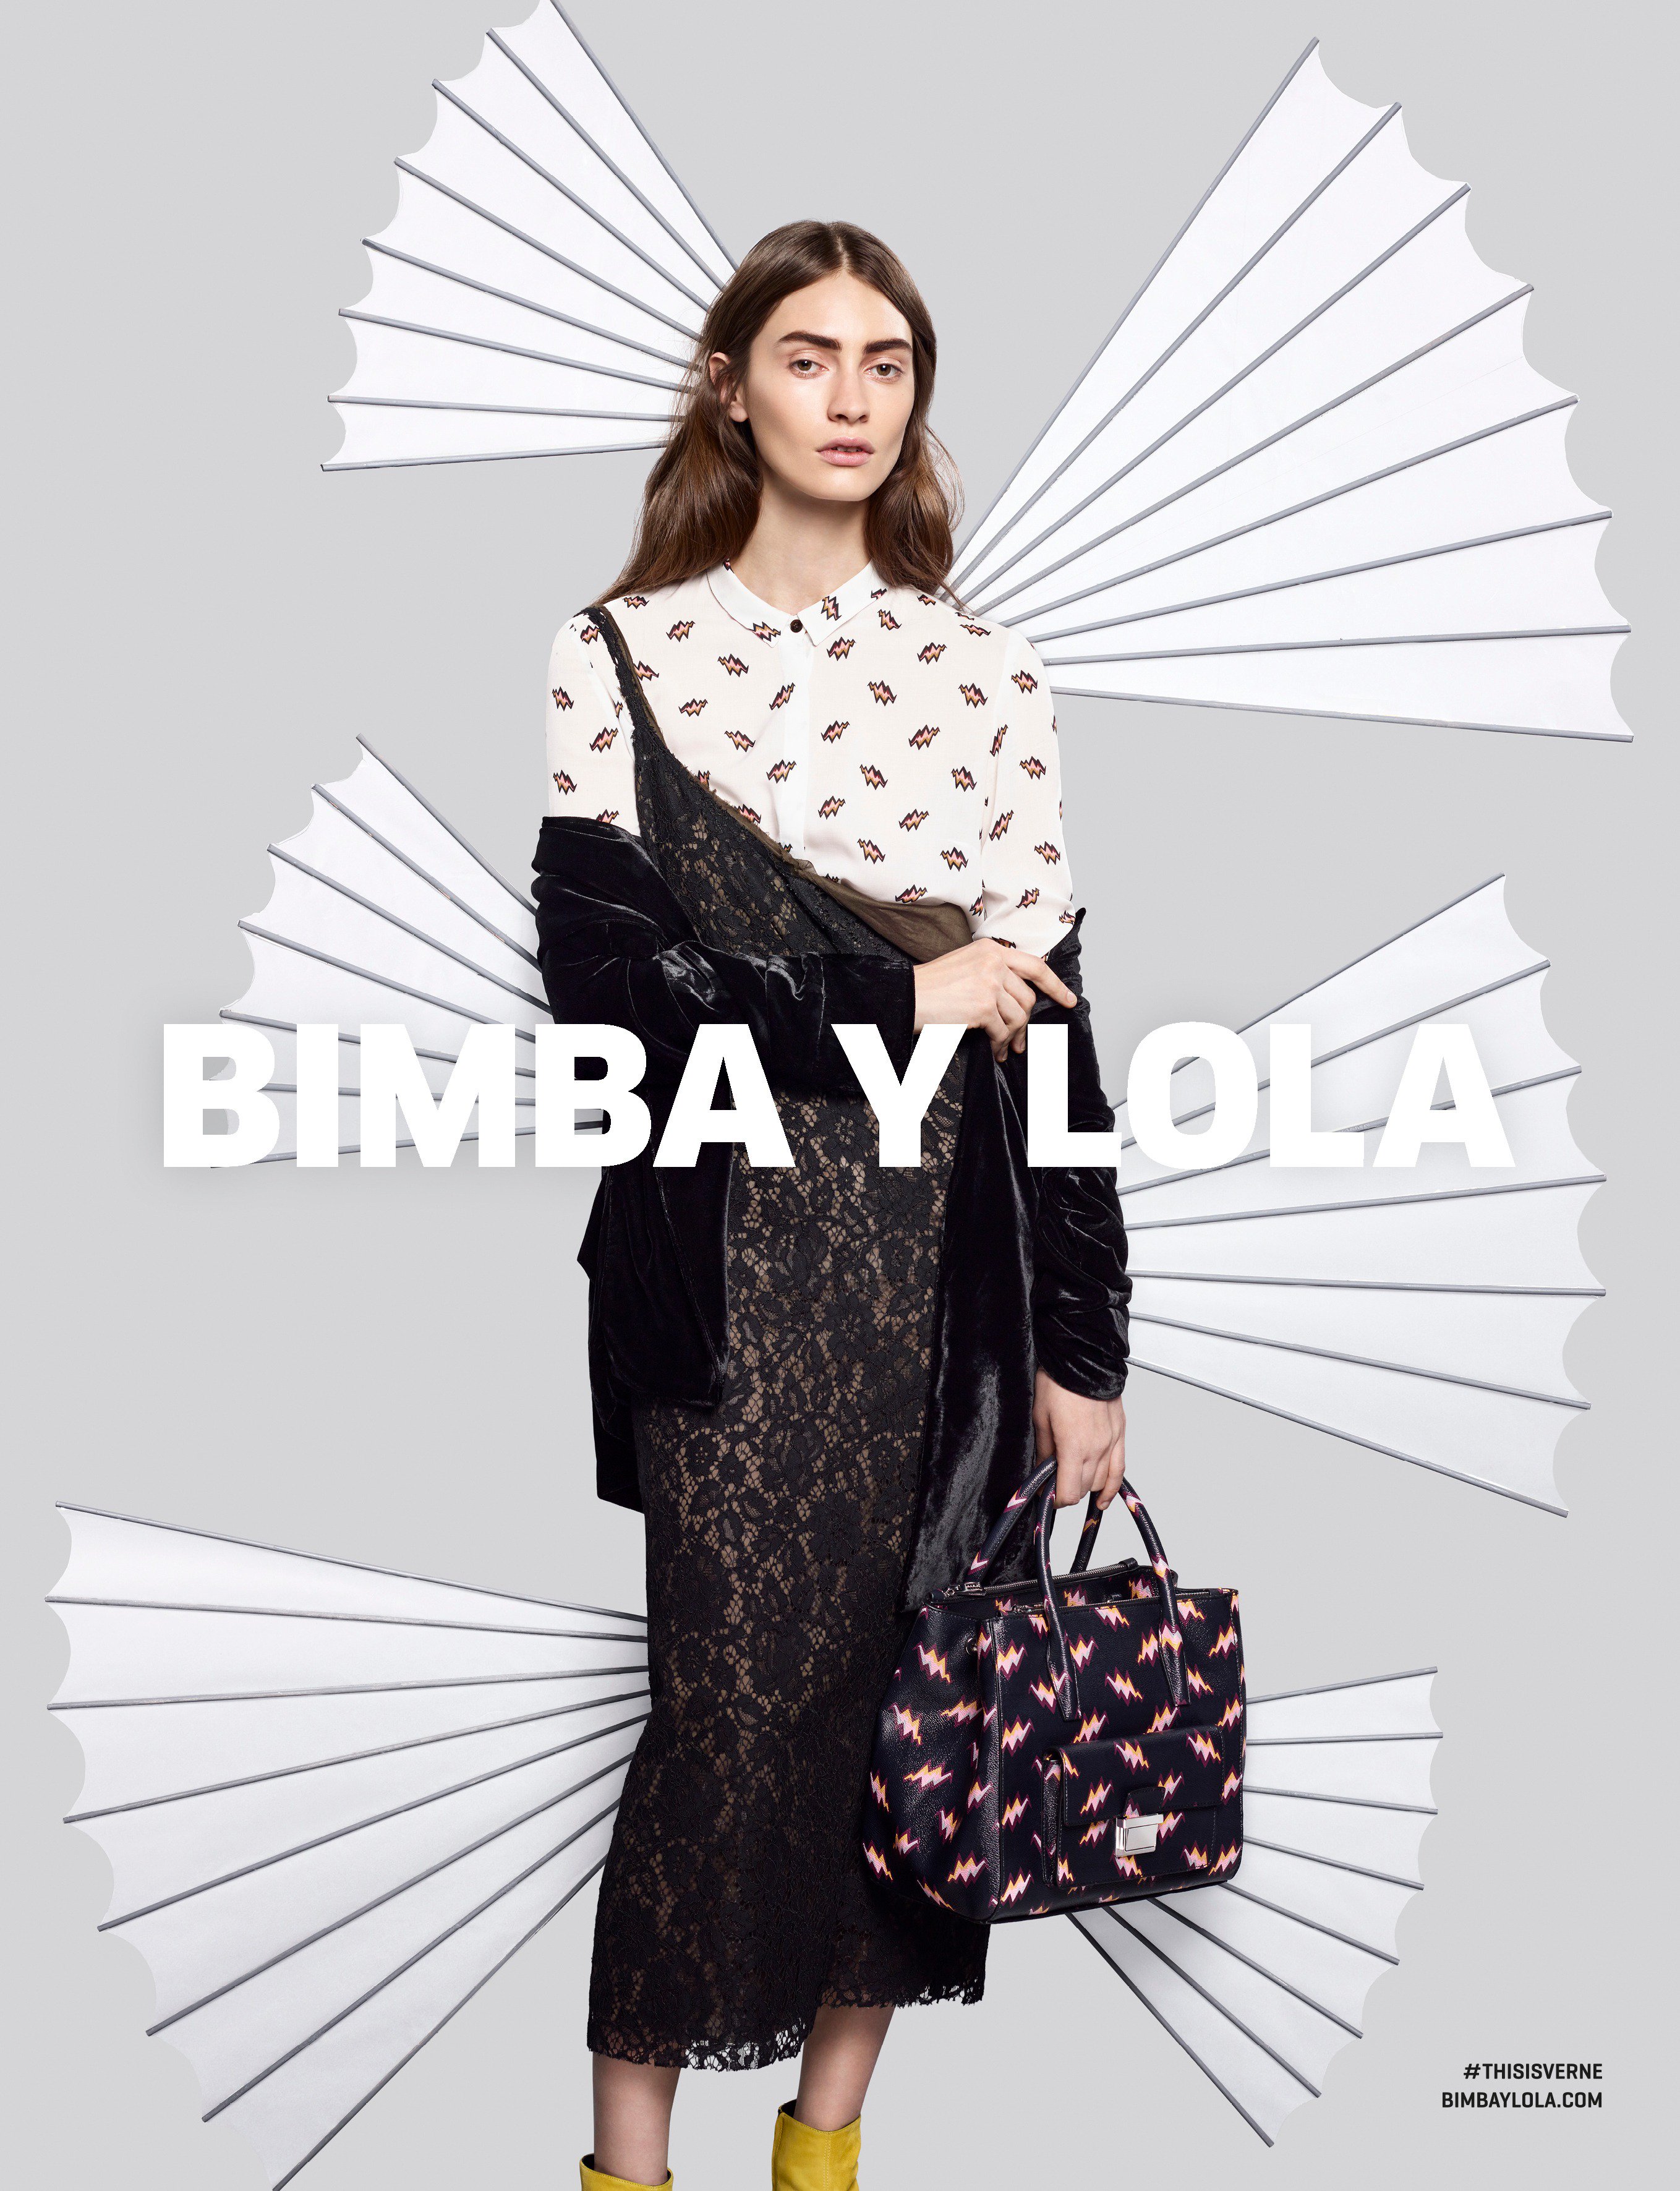 BIMBA Y LOLA on X: Fall Winter 2016/17 Campaign, photographed by